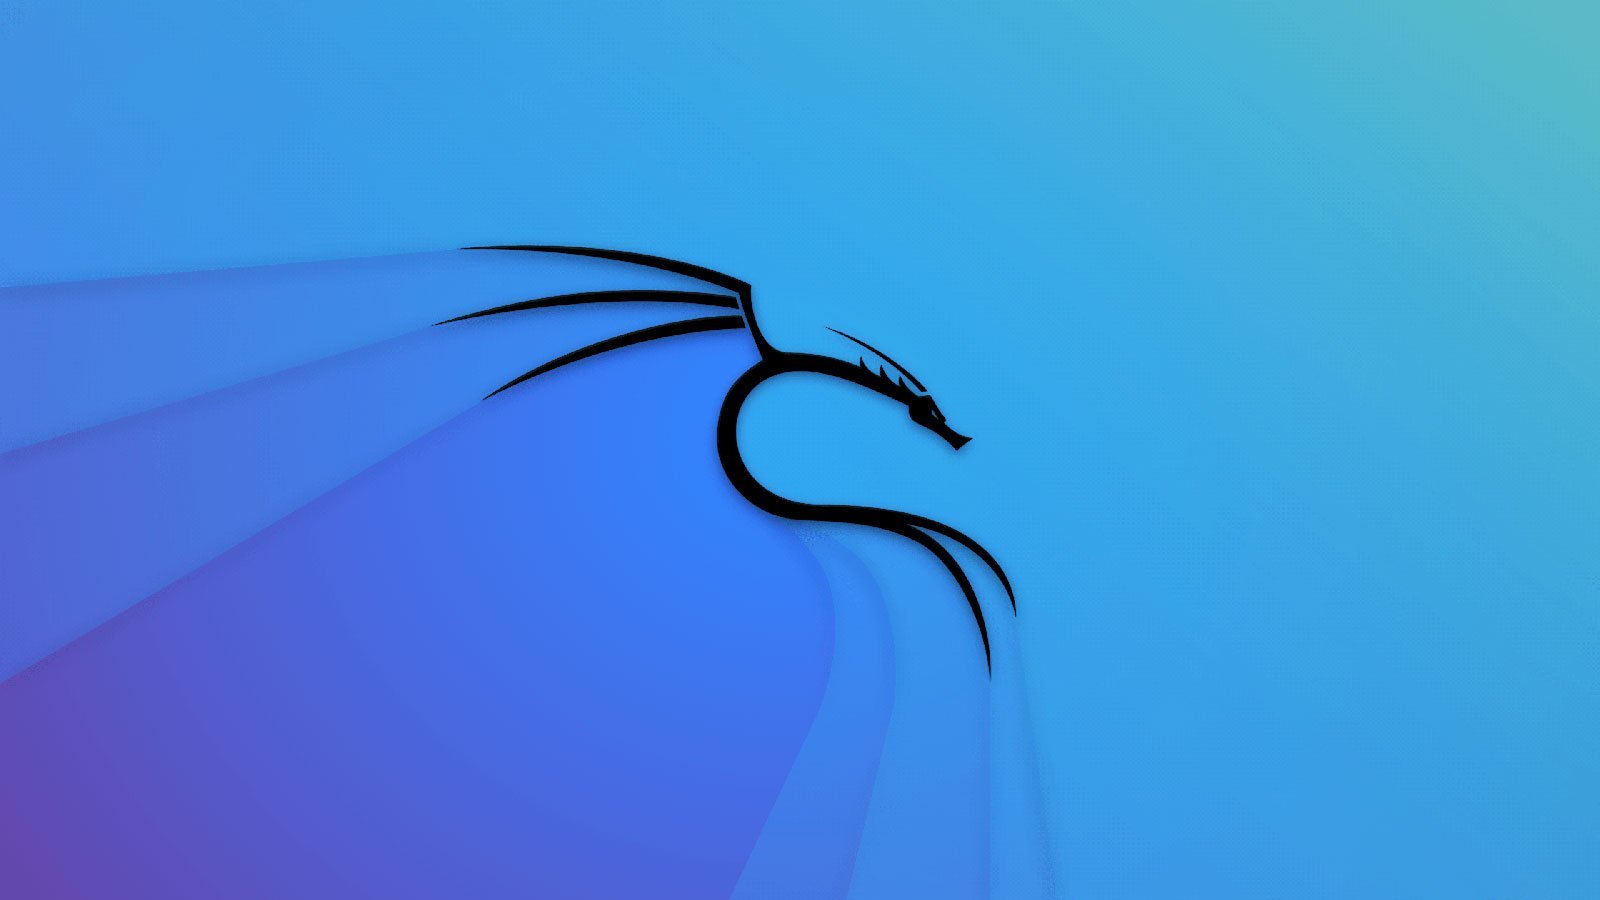 Kali Linux 2023.3 released with 9 new tools, internal changes – Source: www.bleepingcomputer.com